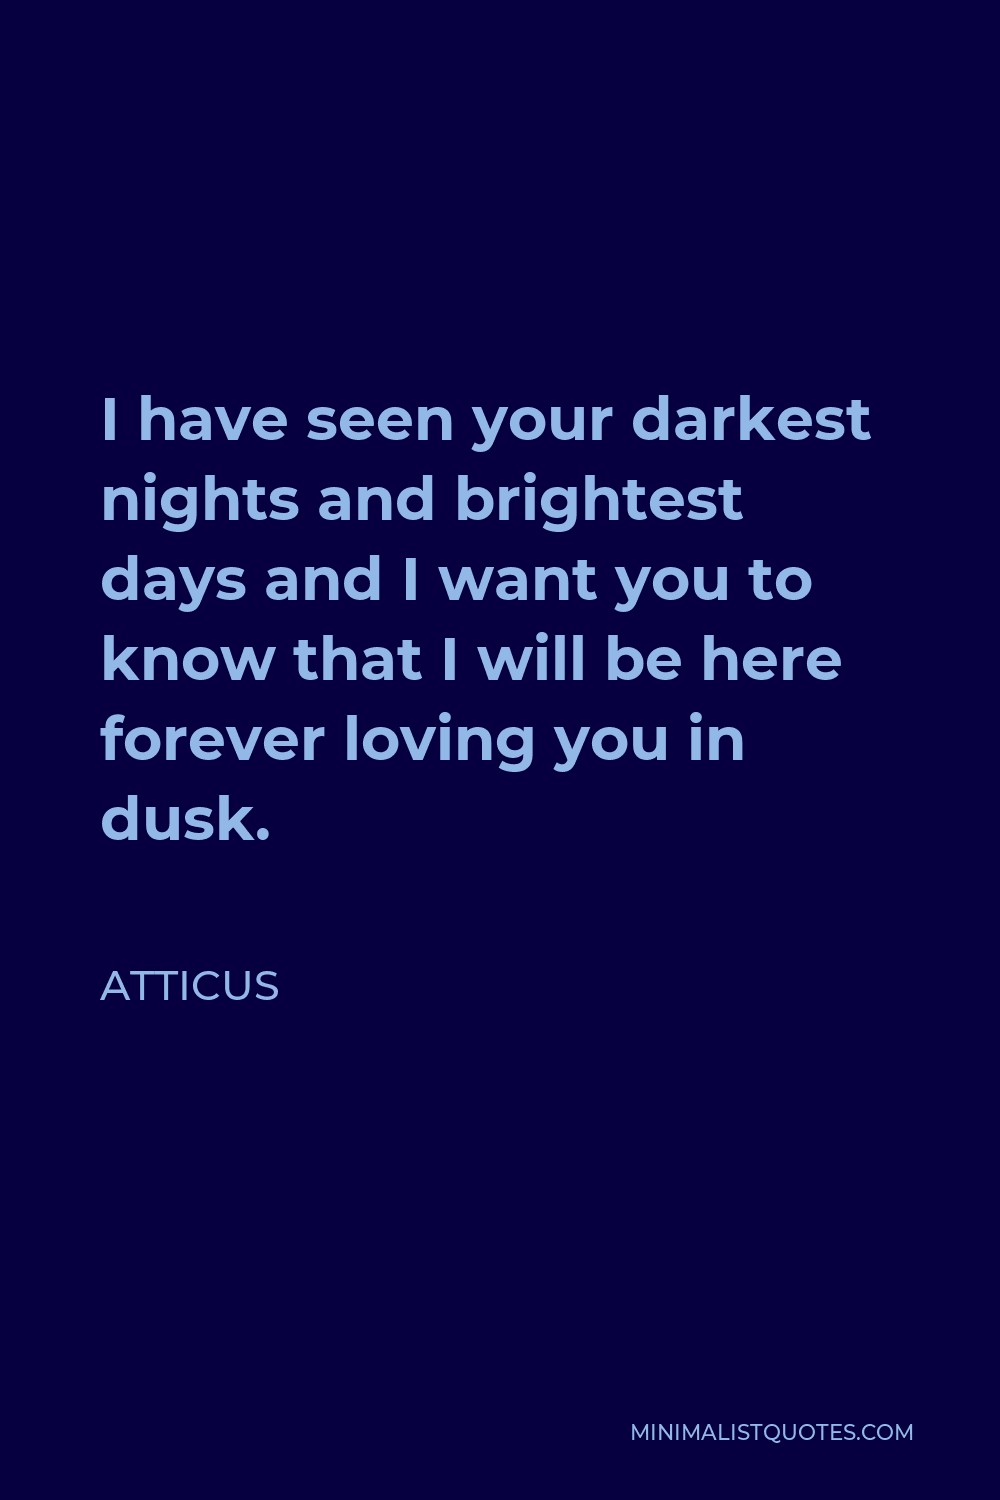 Atticus Quote - I have seen your darkest nights and brightest days and I want you to know that I will be here forever loving you in dusk.